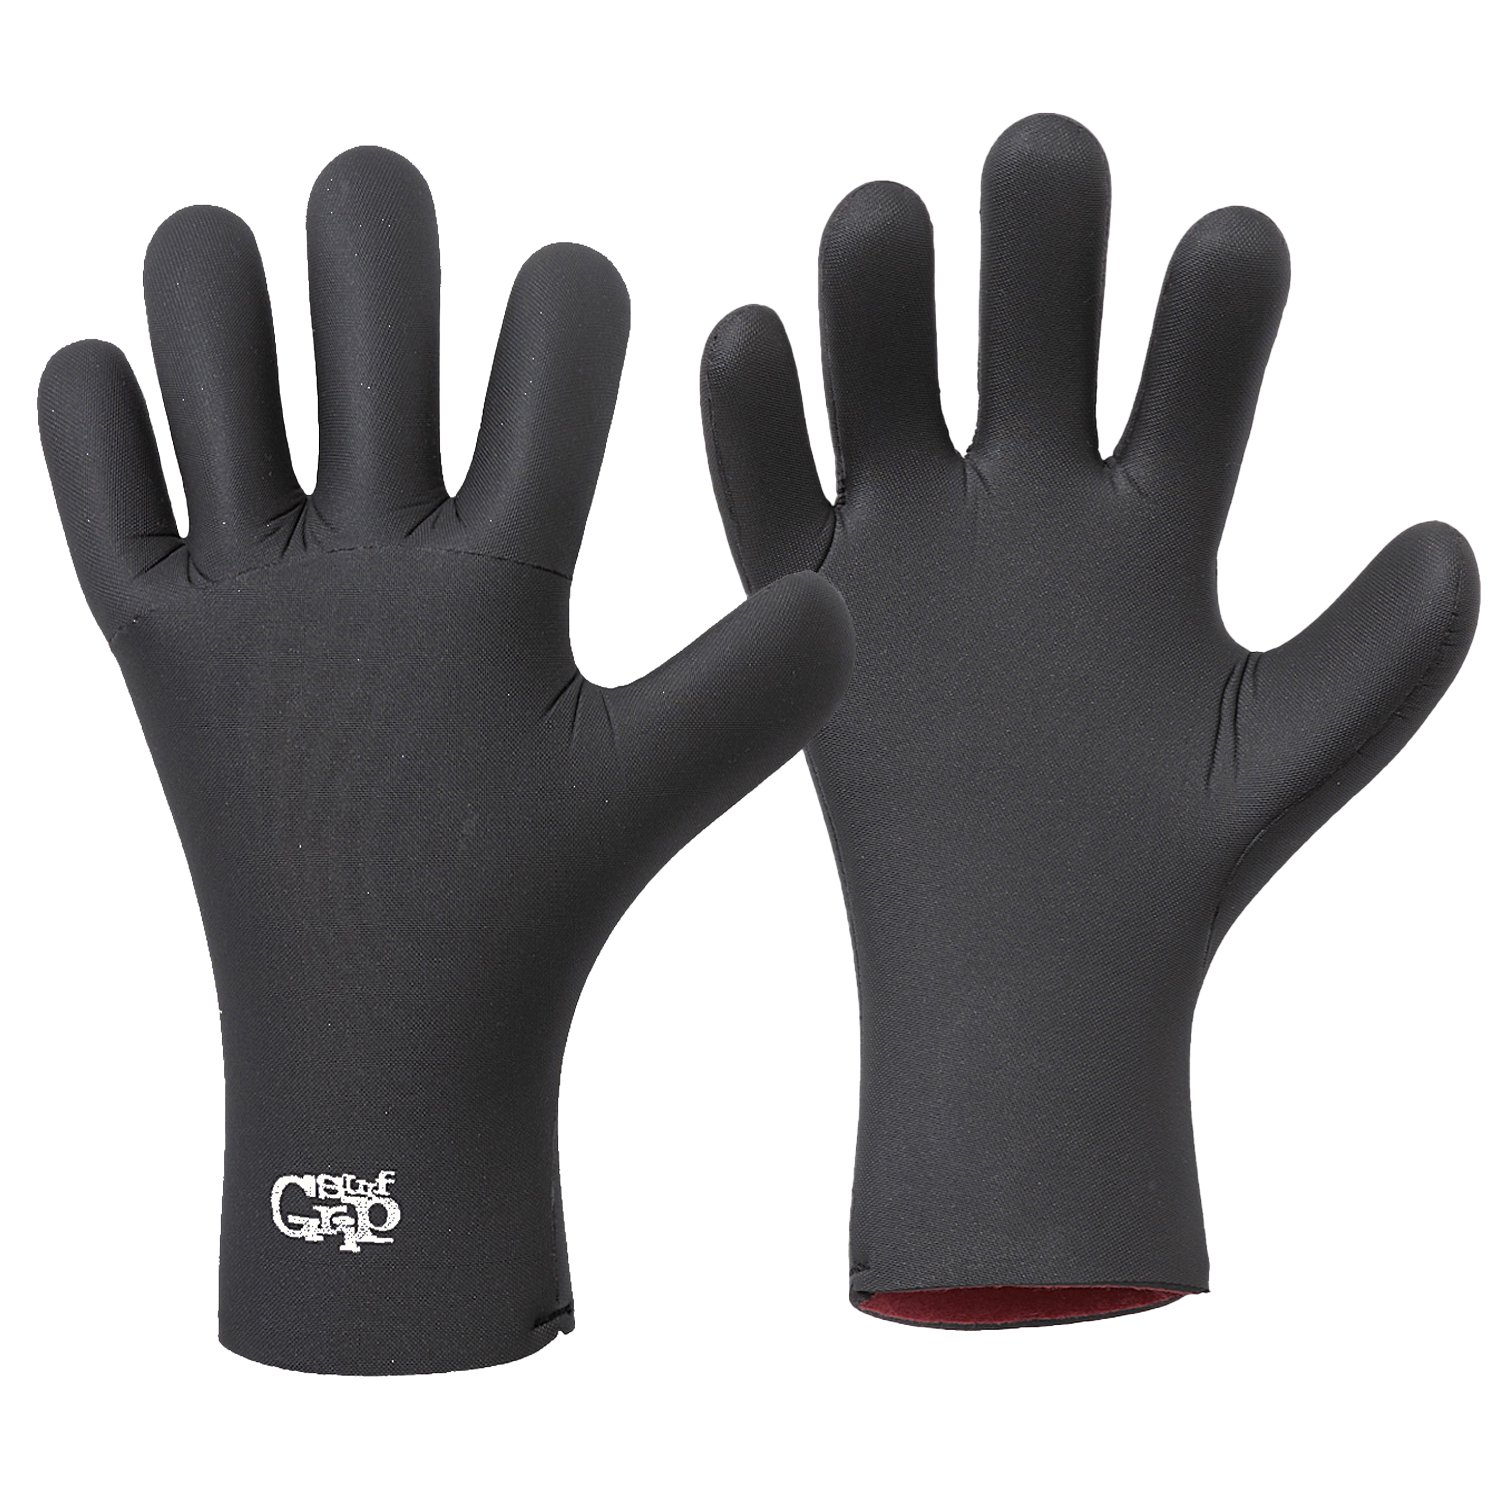 <img class='new_mark_img1' src='https://img.shop-pro.jp/img/new/icons1.gif' style='border:none;display:inline;margin:0px;padding:0px;width:auto;' />Surf Grip Rubber Glove 1mm1